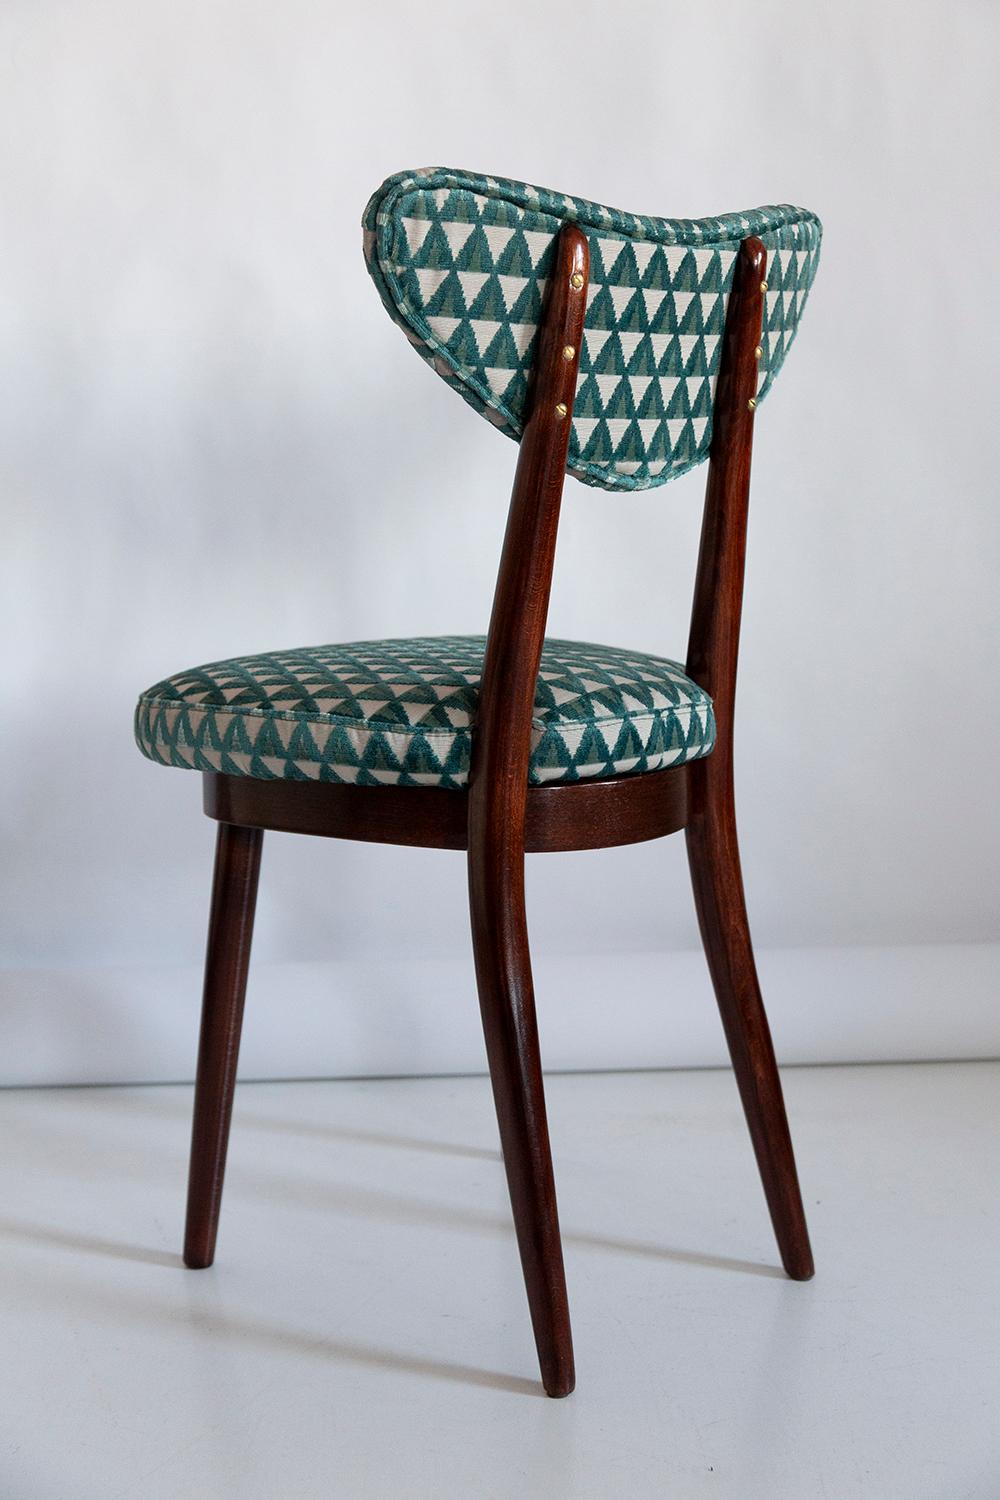 Set of Six Mid-Century Heart Chairs in Amuleto Green Velvet, Europe, 1960s For Sale 5